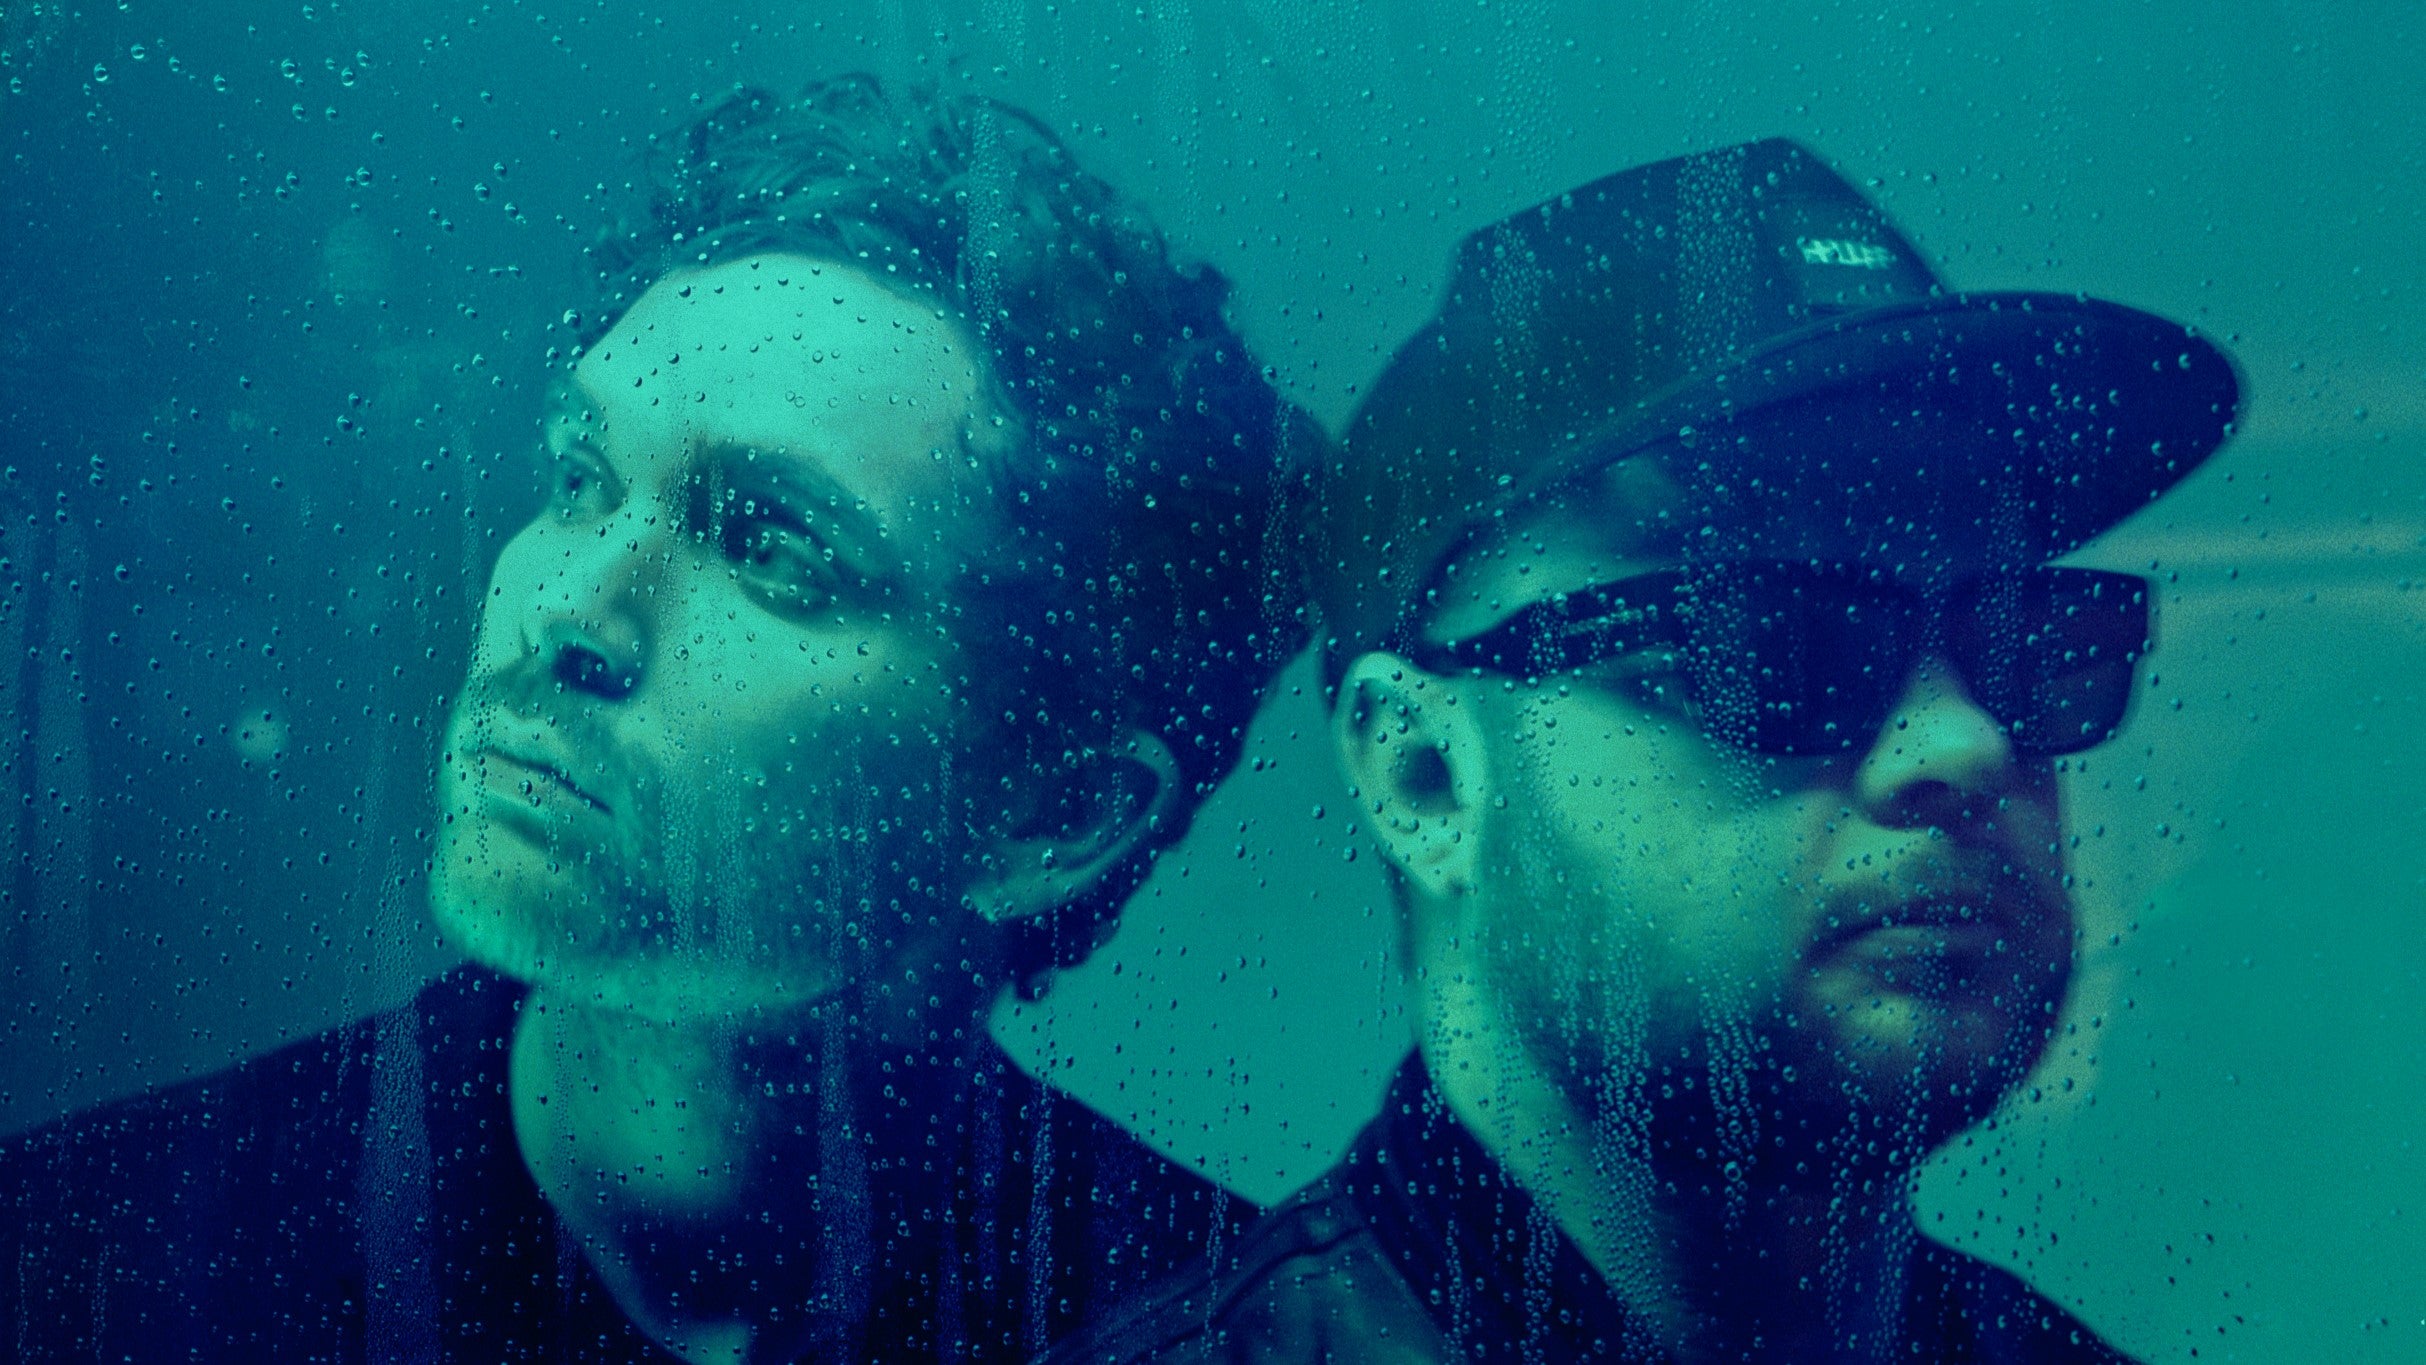 Royal Blood presale code for event tickets in St Louis, MO (The Pageant)